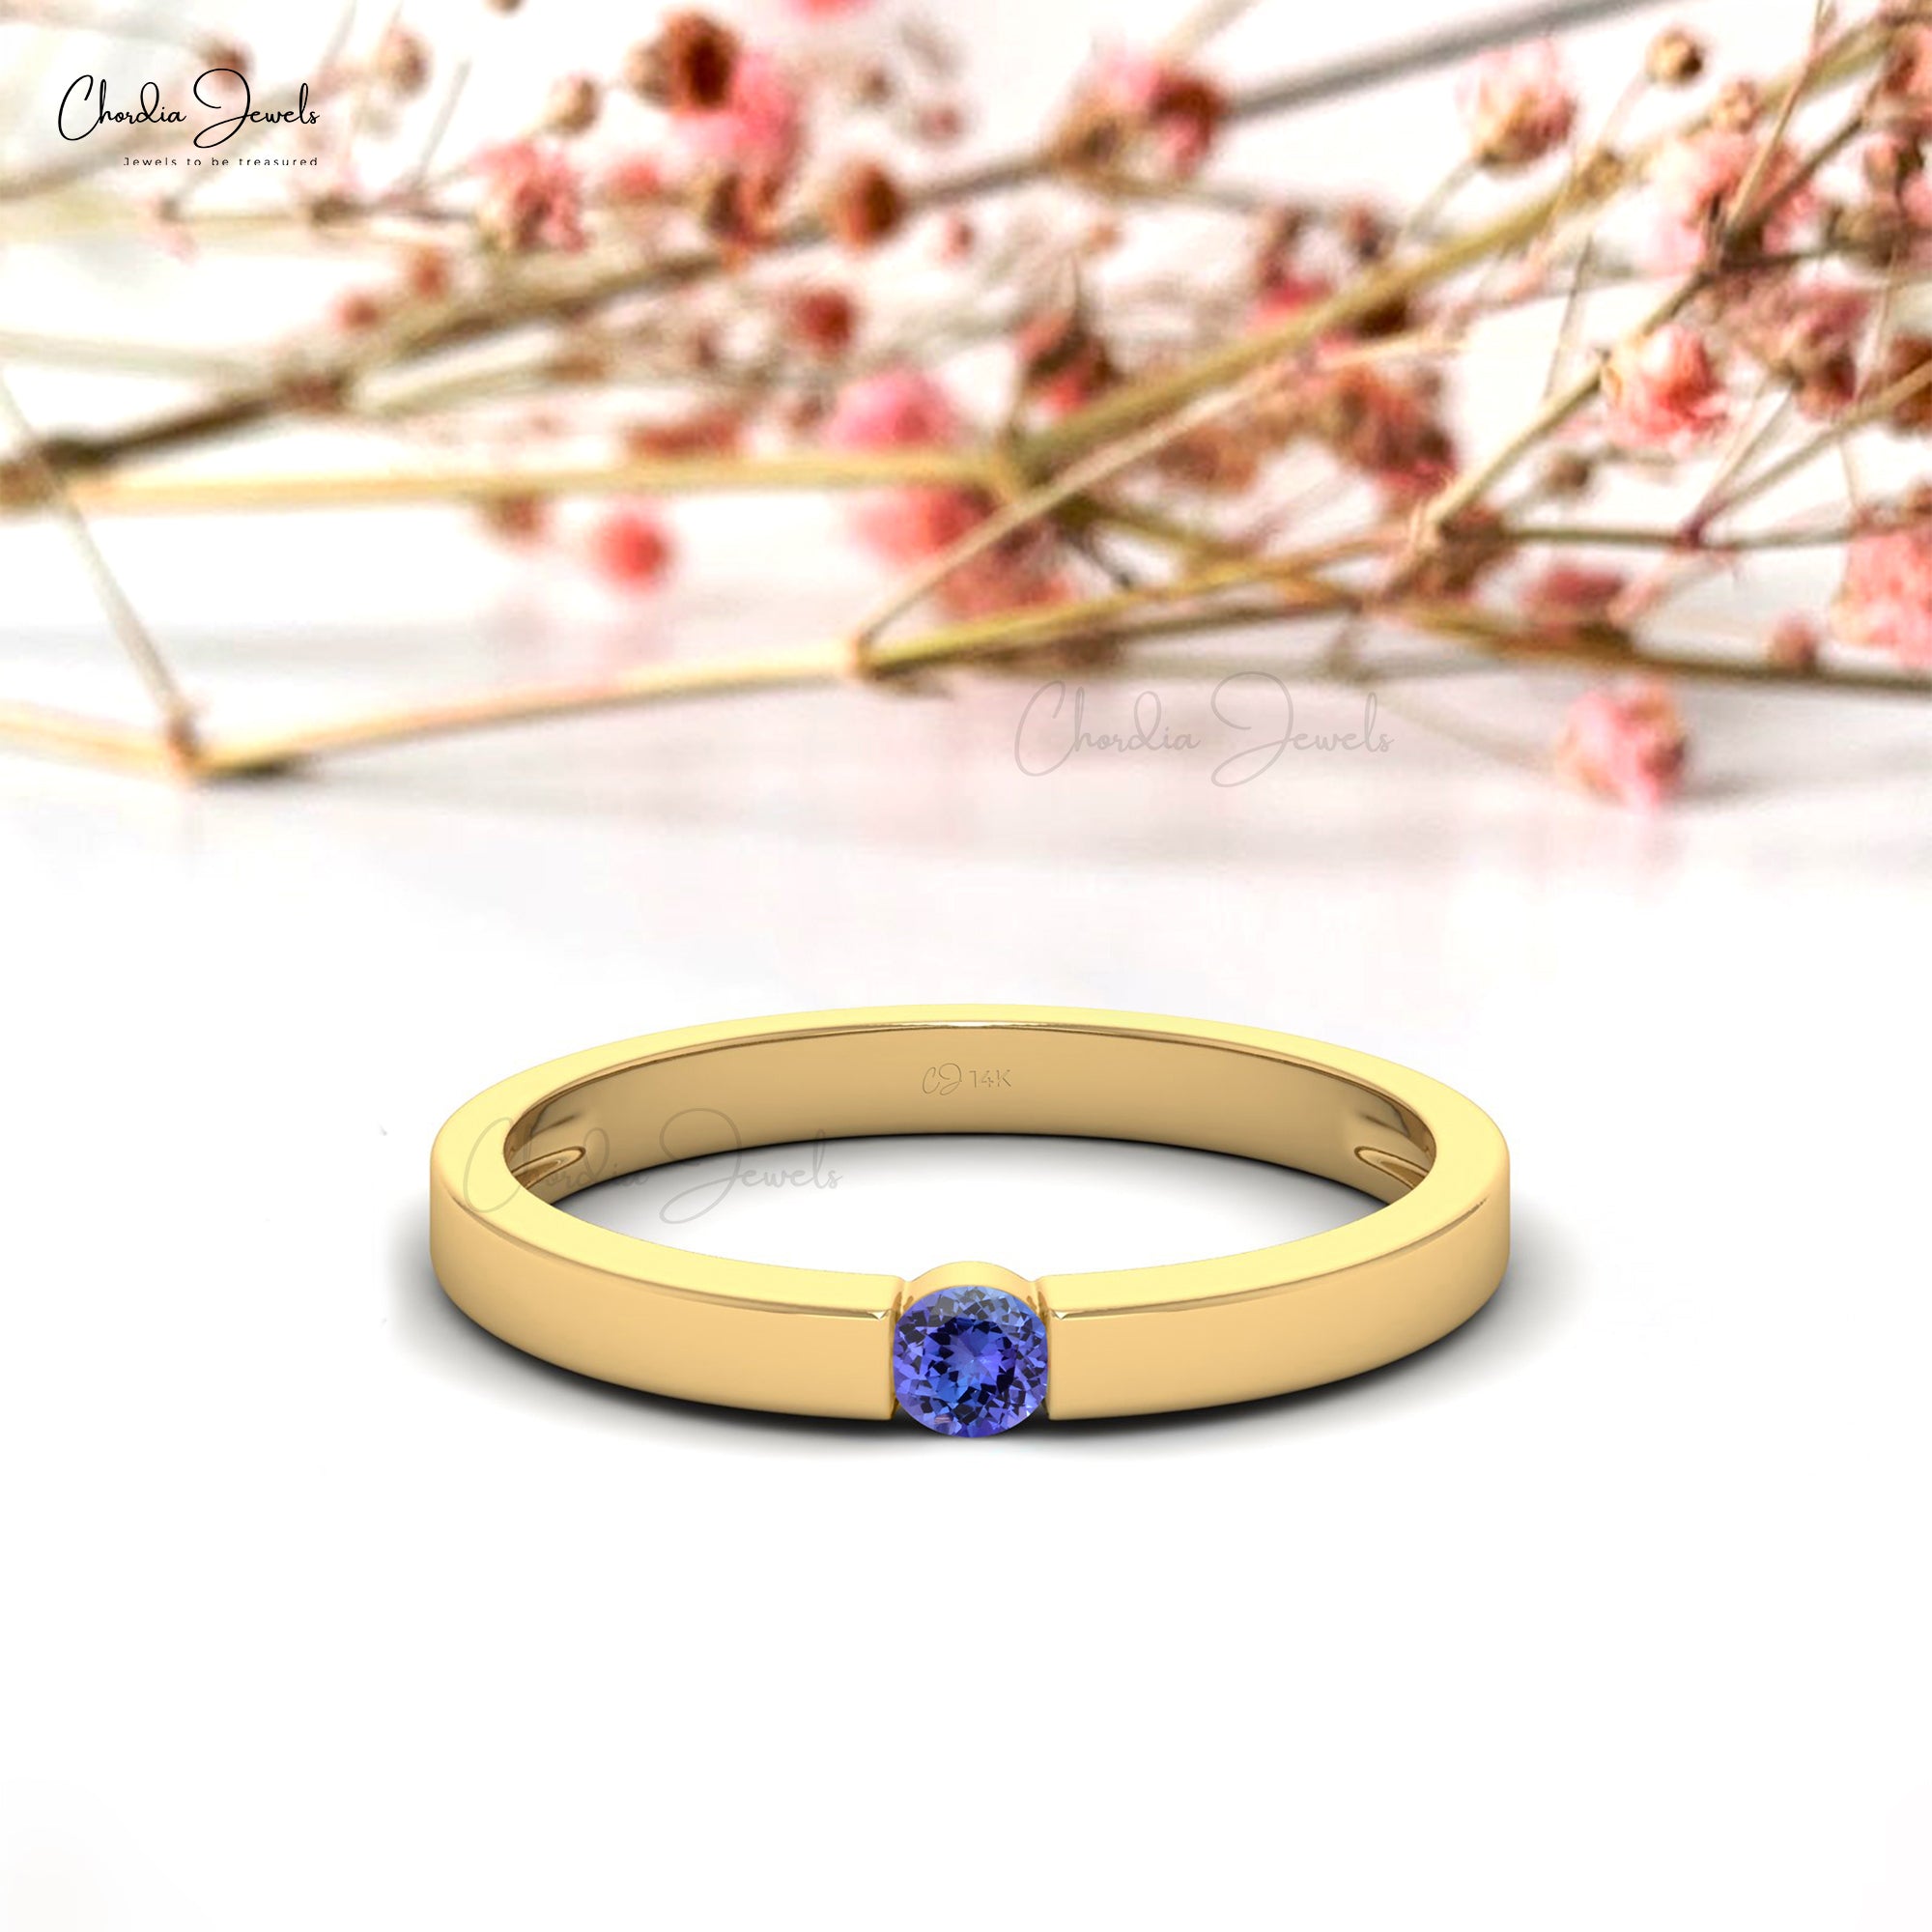 Real Tanzanite Ring in 3mm Round cut Gemstone for Anniversary Gift